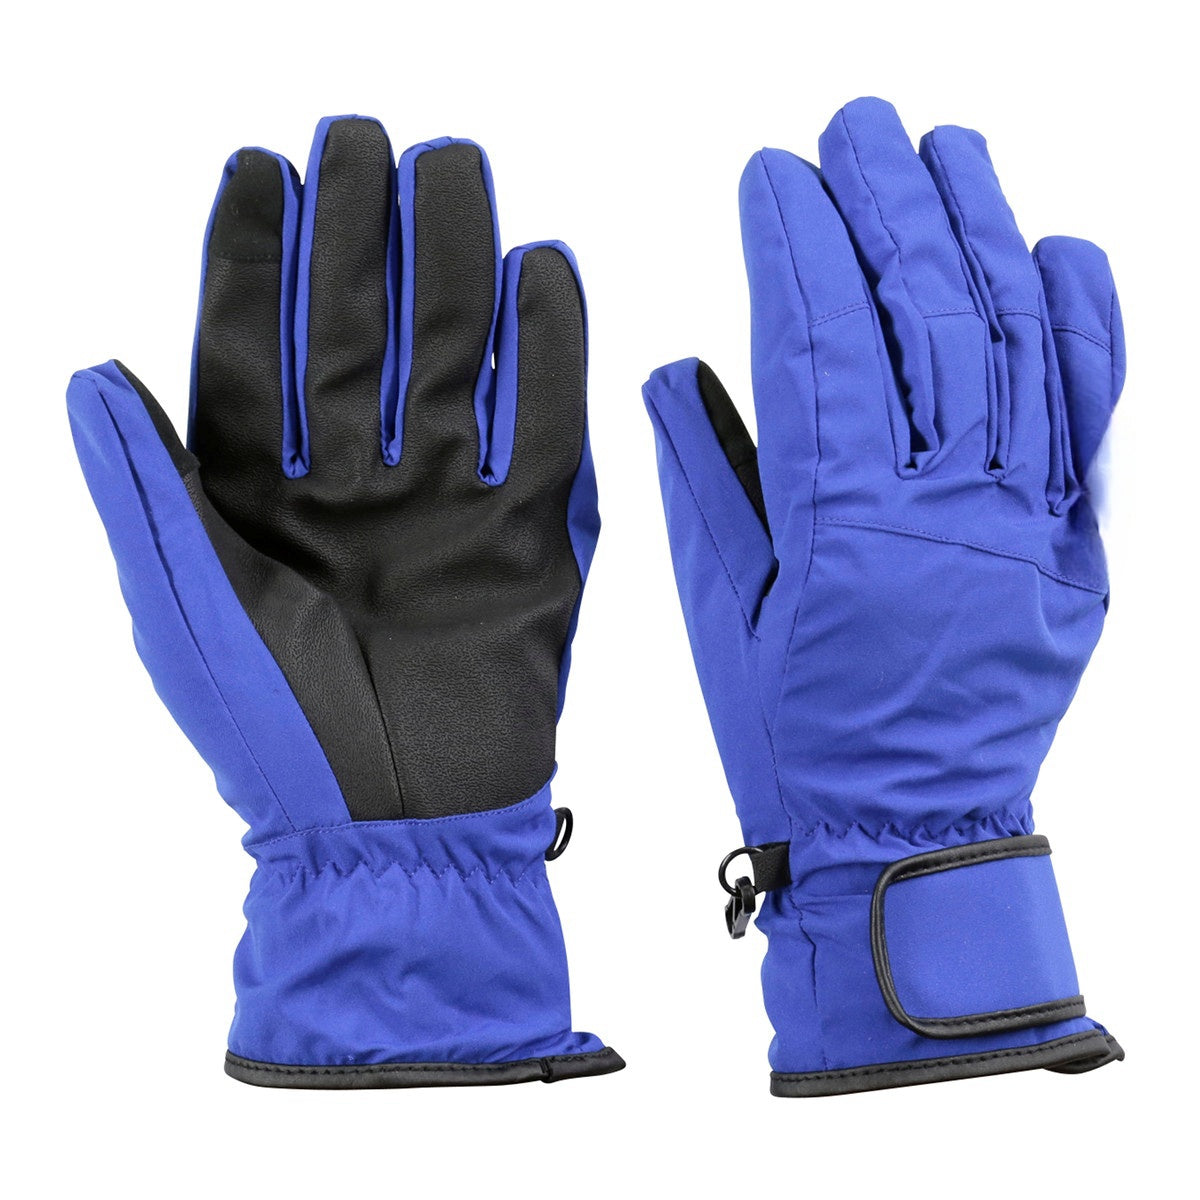 Windproof/water-repellent stretch gloves for women - EA1078